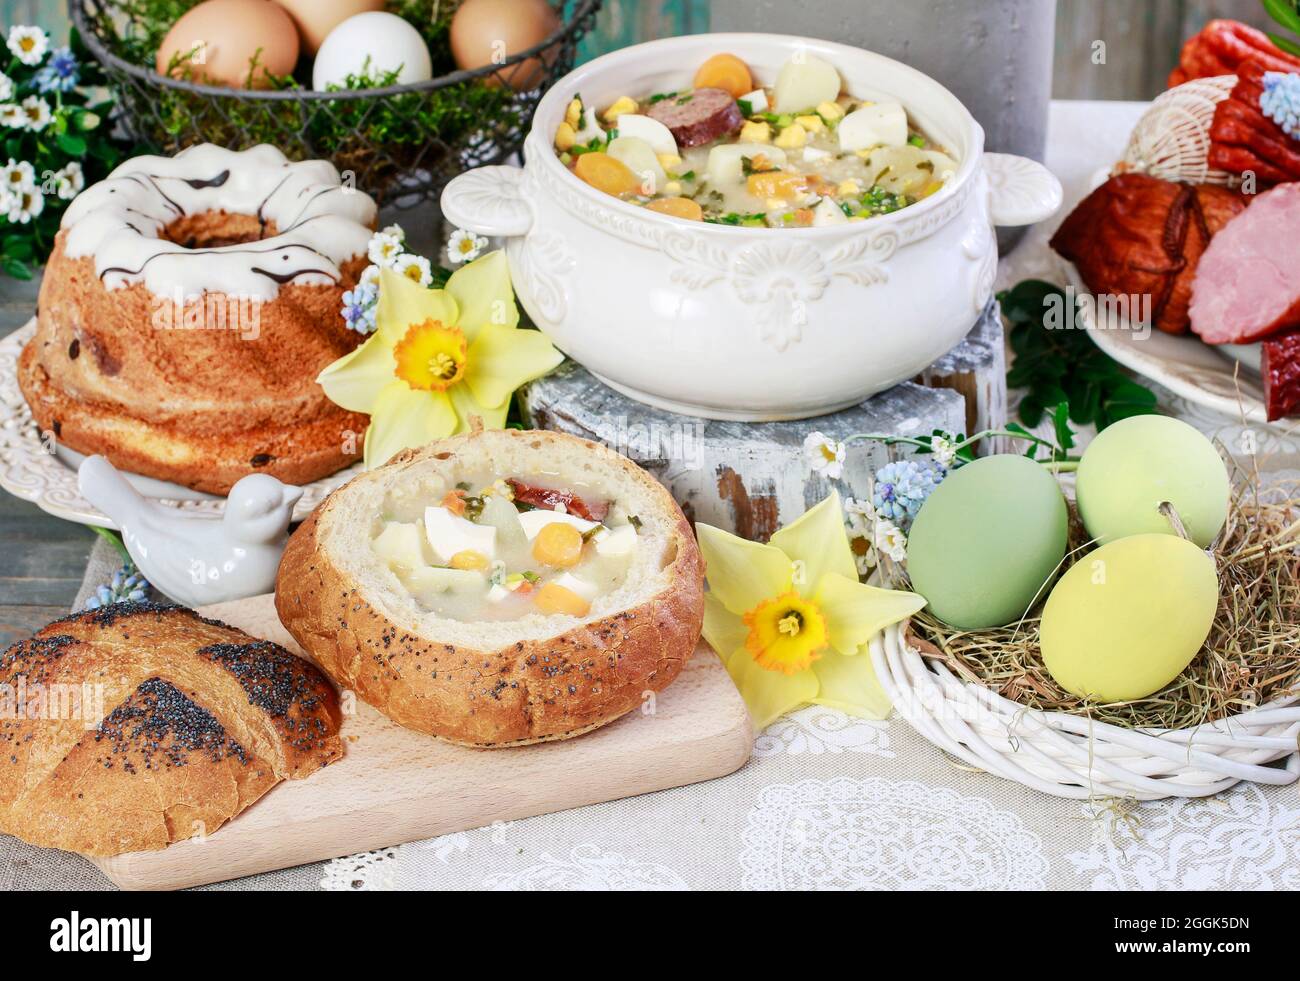 The sour rye soup, easter cakes and saussages on the table. Festive dish Stock Photo